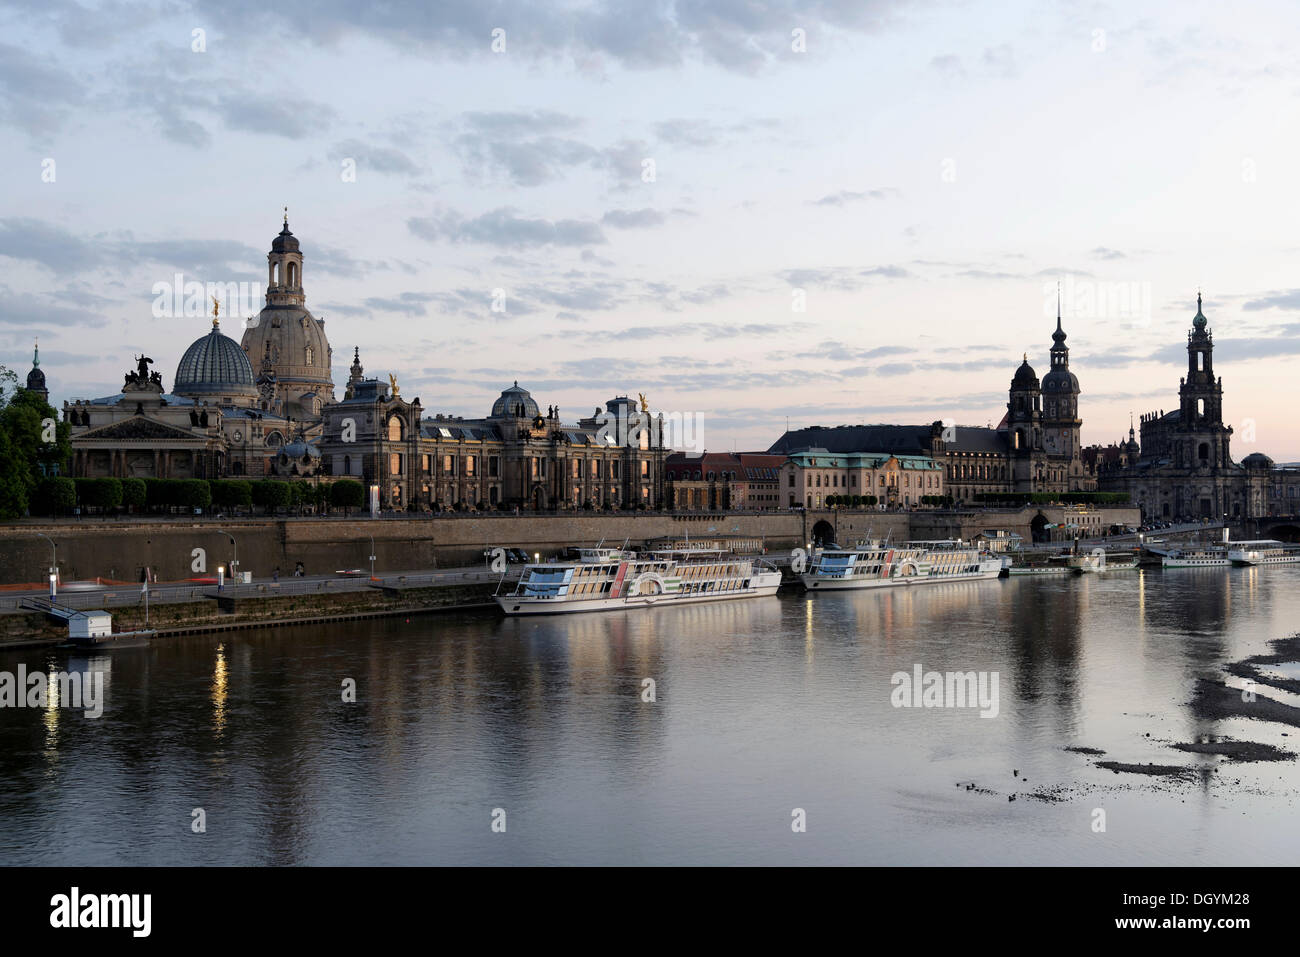 Evening mood, old town, Elbe river, Dresden, Florence of the Elbe, Saxony Stock Photo